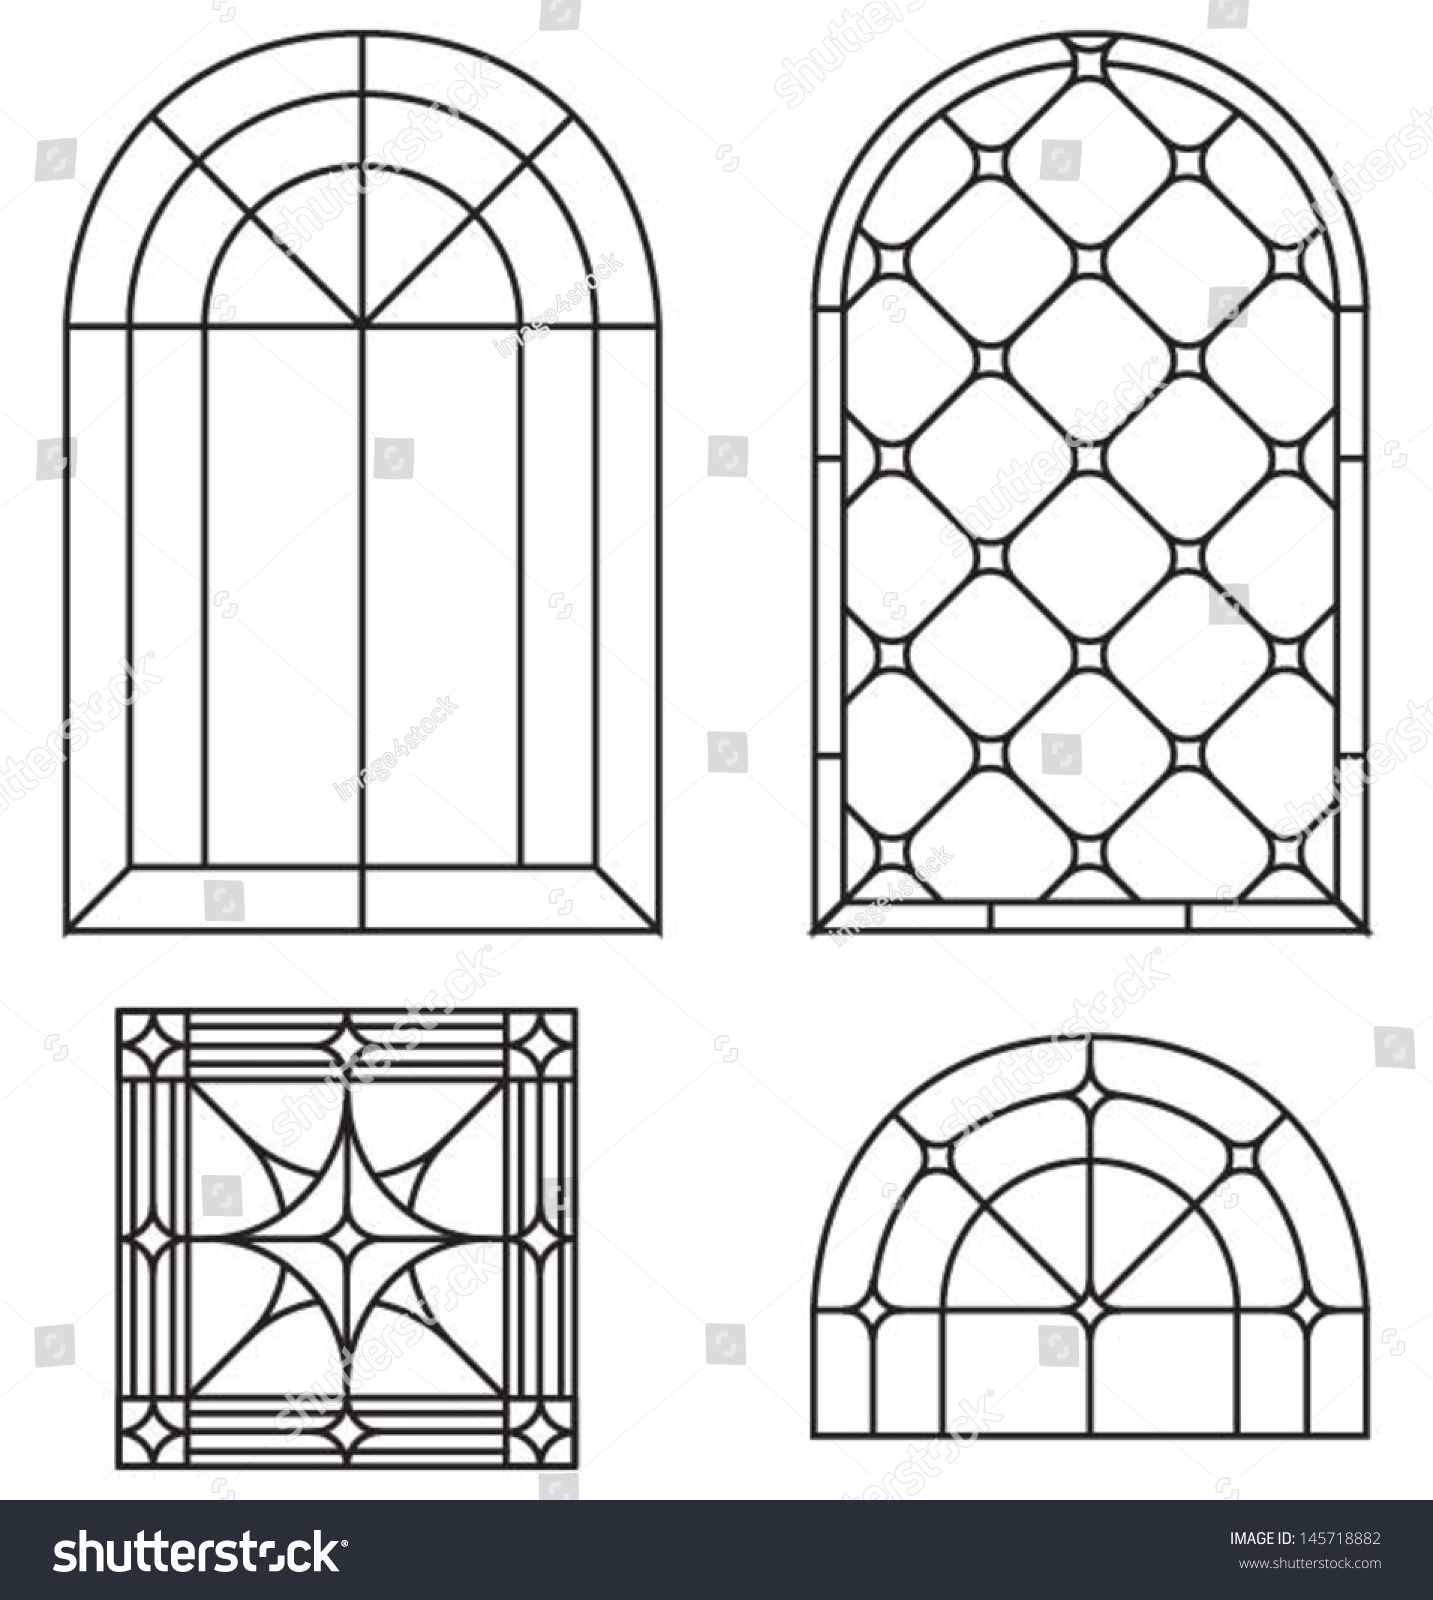 stained glass clip art borders - photo #36